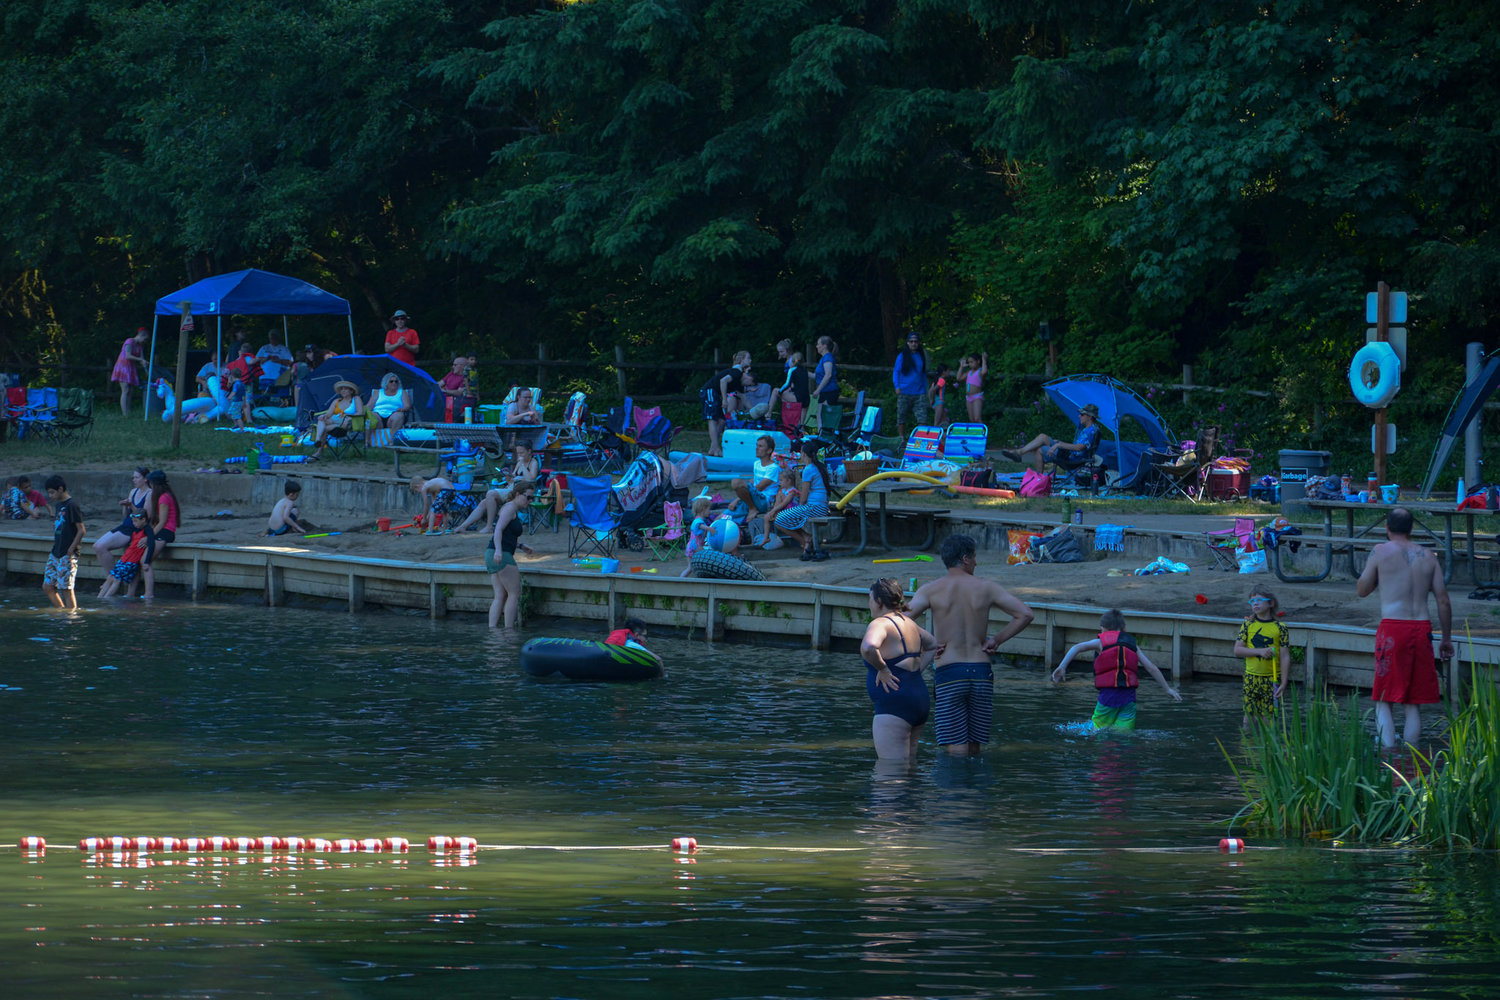 People filled the beach and swimming areas of Battle Ground Lake State Park during the heatwave on June 26.